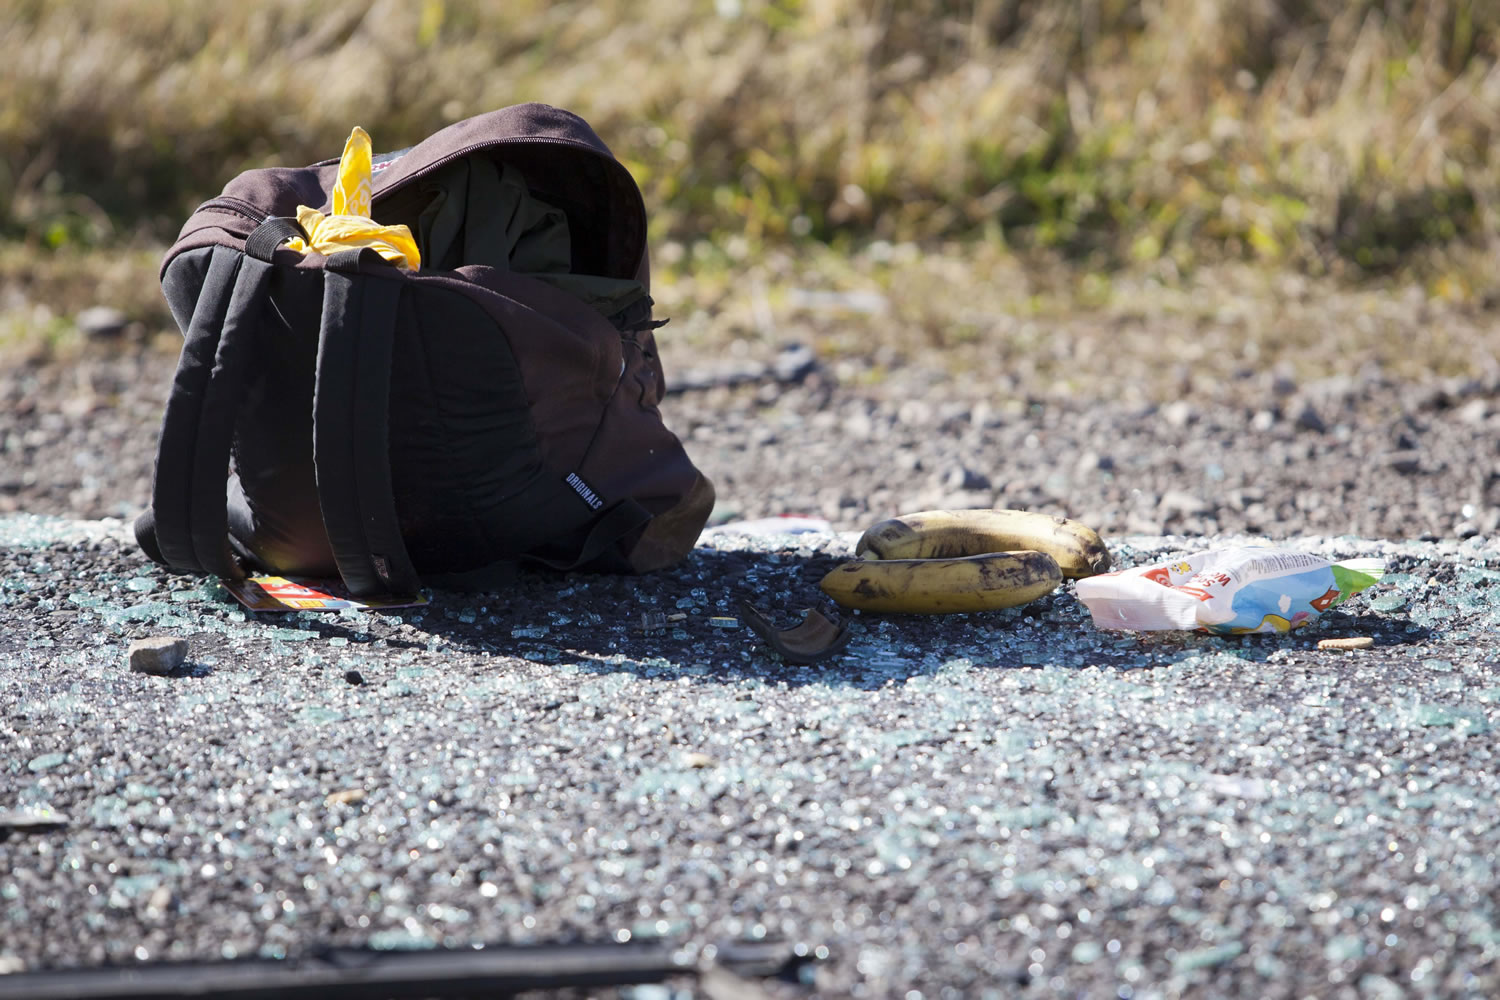 A backpack lies on a road after a minivan crashed, near Turangi, New Zealand, Saturday, May 12, 2012. Three Boston University students who were studying in New Zealand were killed Saturday when their minivan crashed. At least five other students from the university were injured in the accident, including one who was in critical condition.